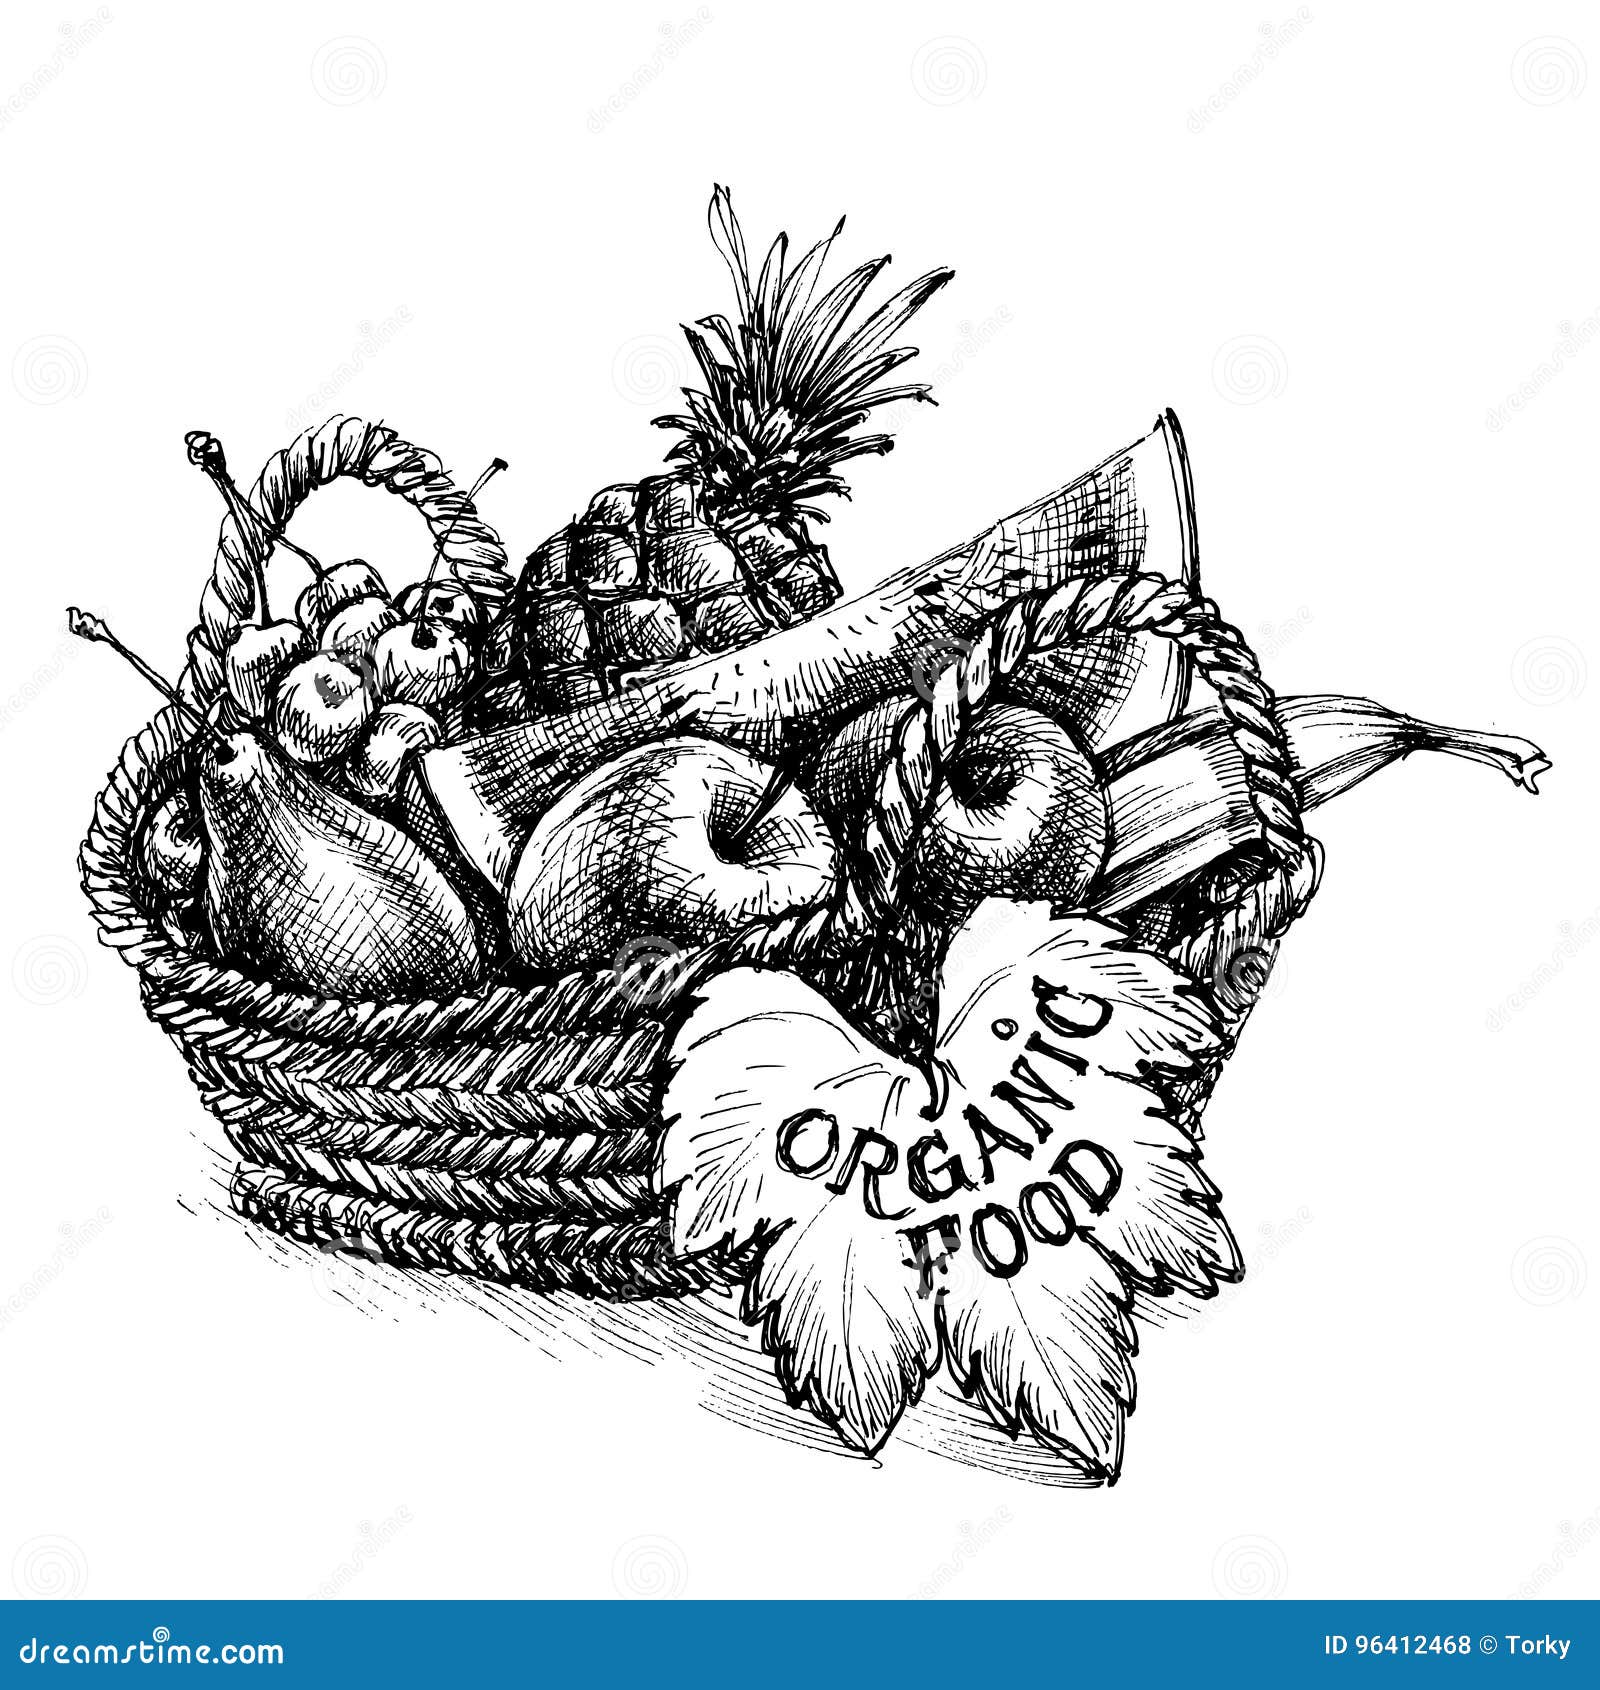 How to draw Vegetables basket step by step - YouTube